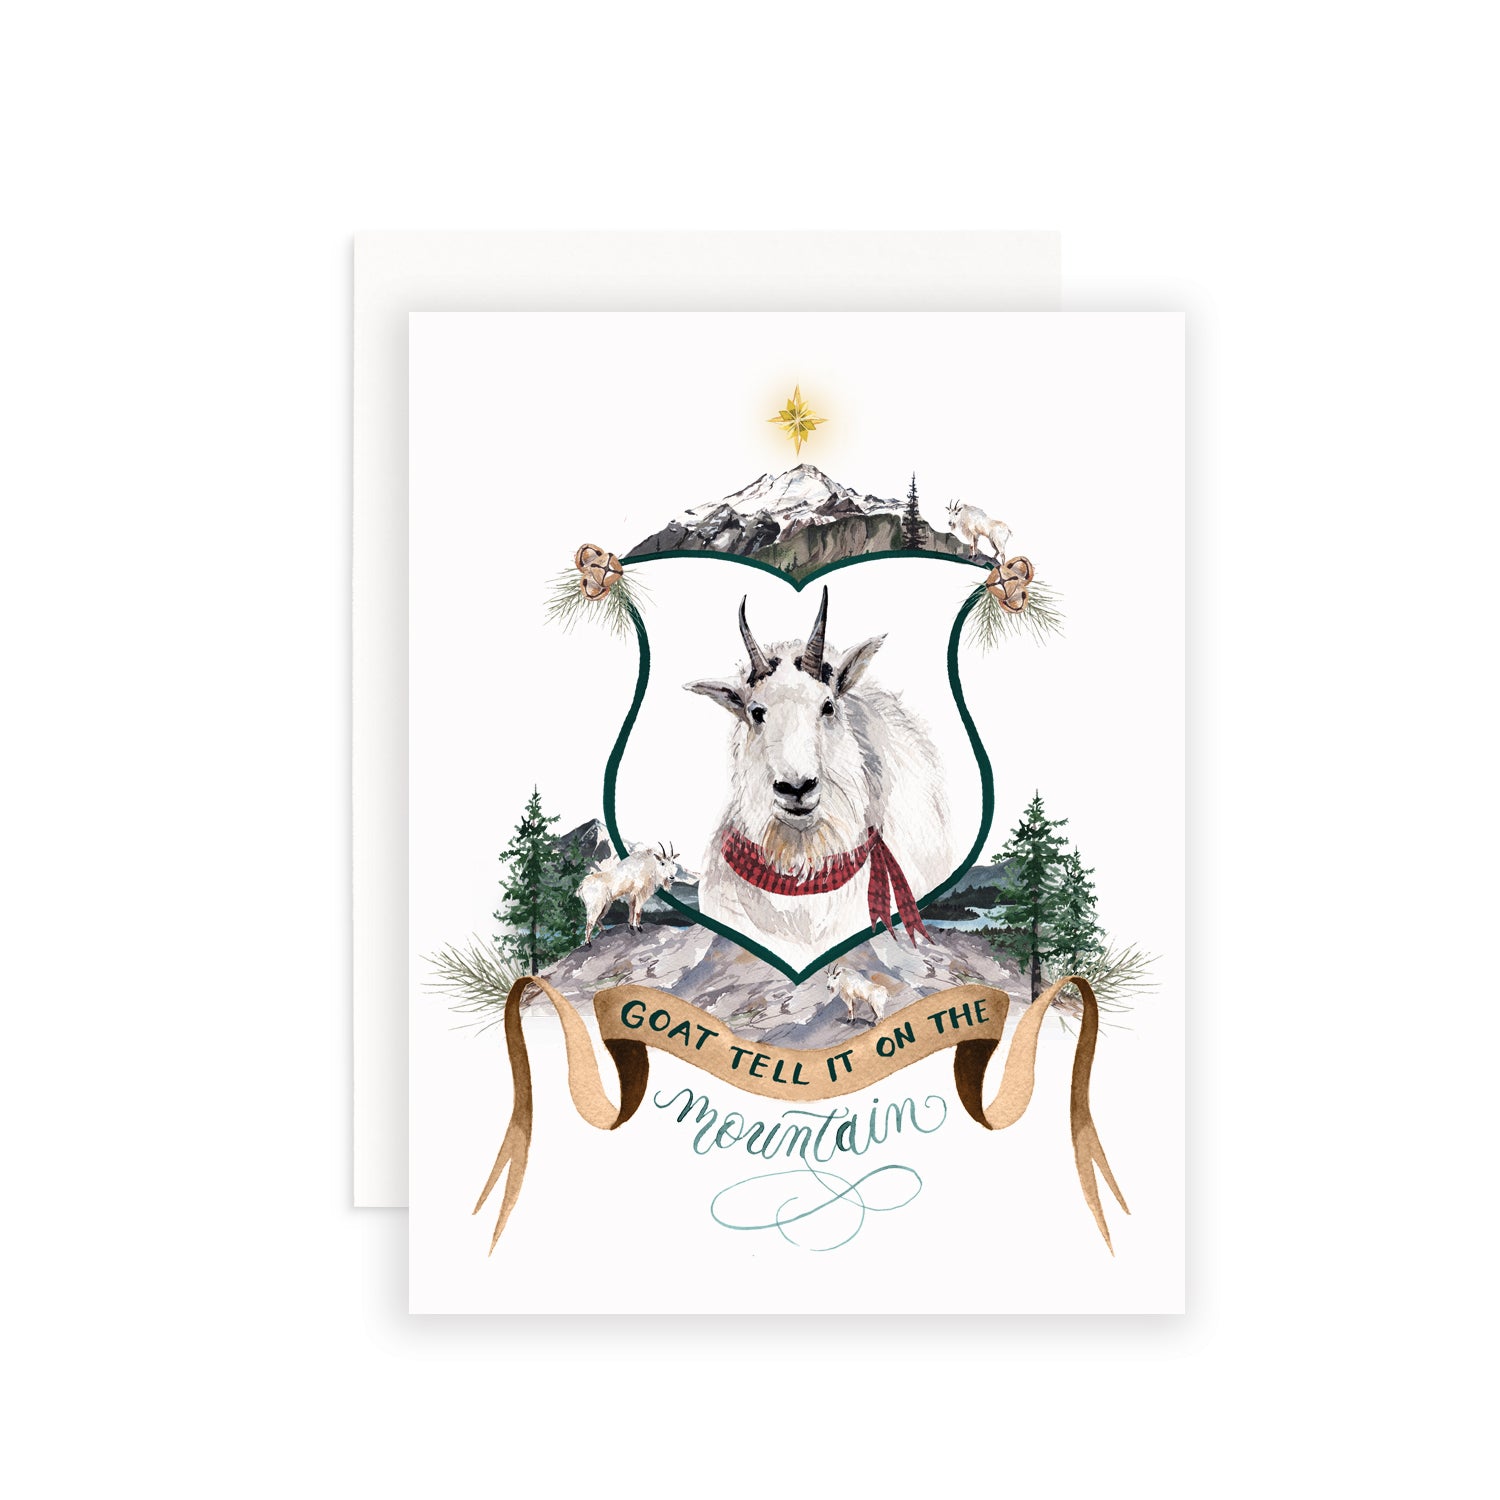 Goat tell it on the Mountain Greeting Card